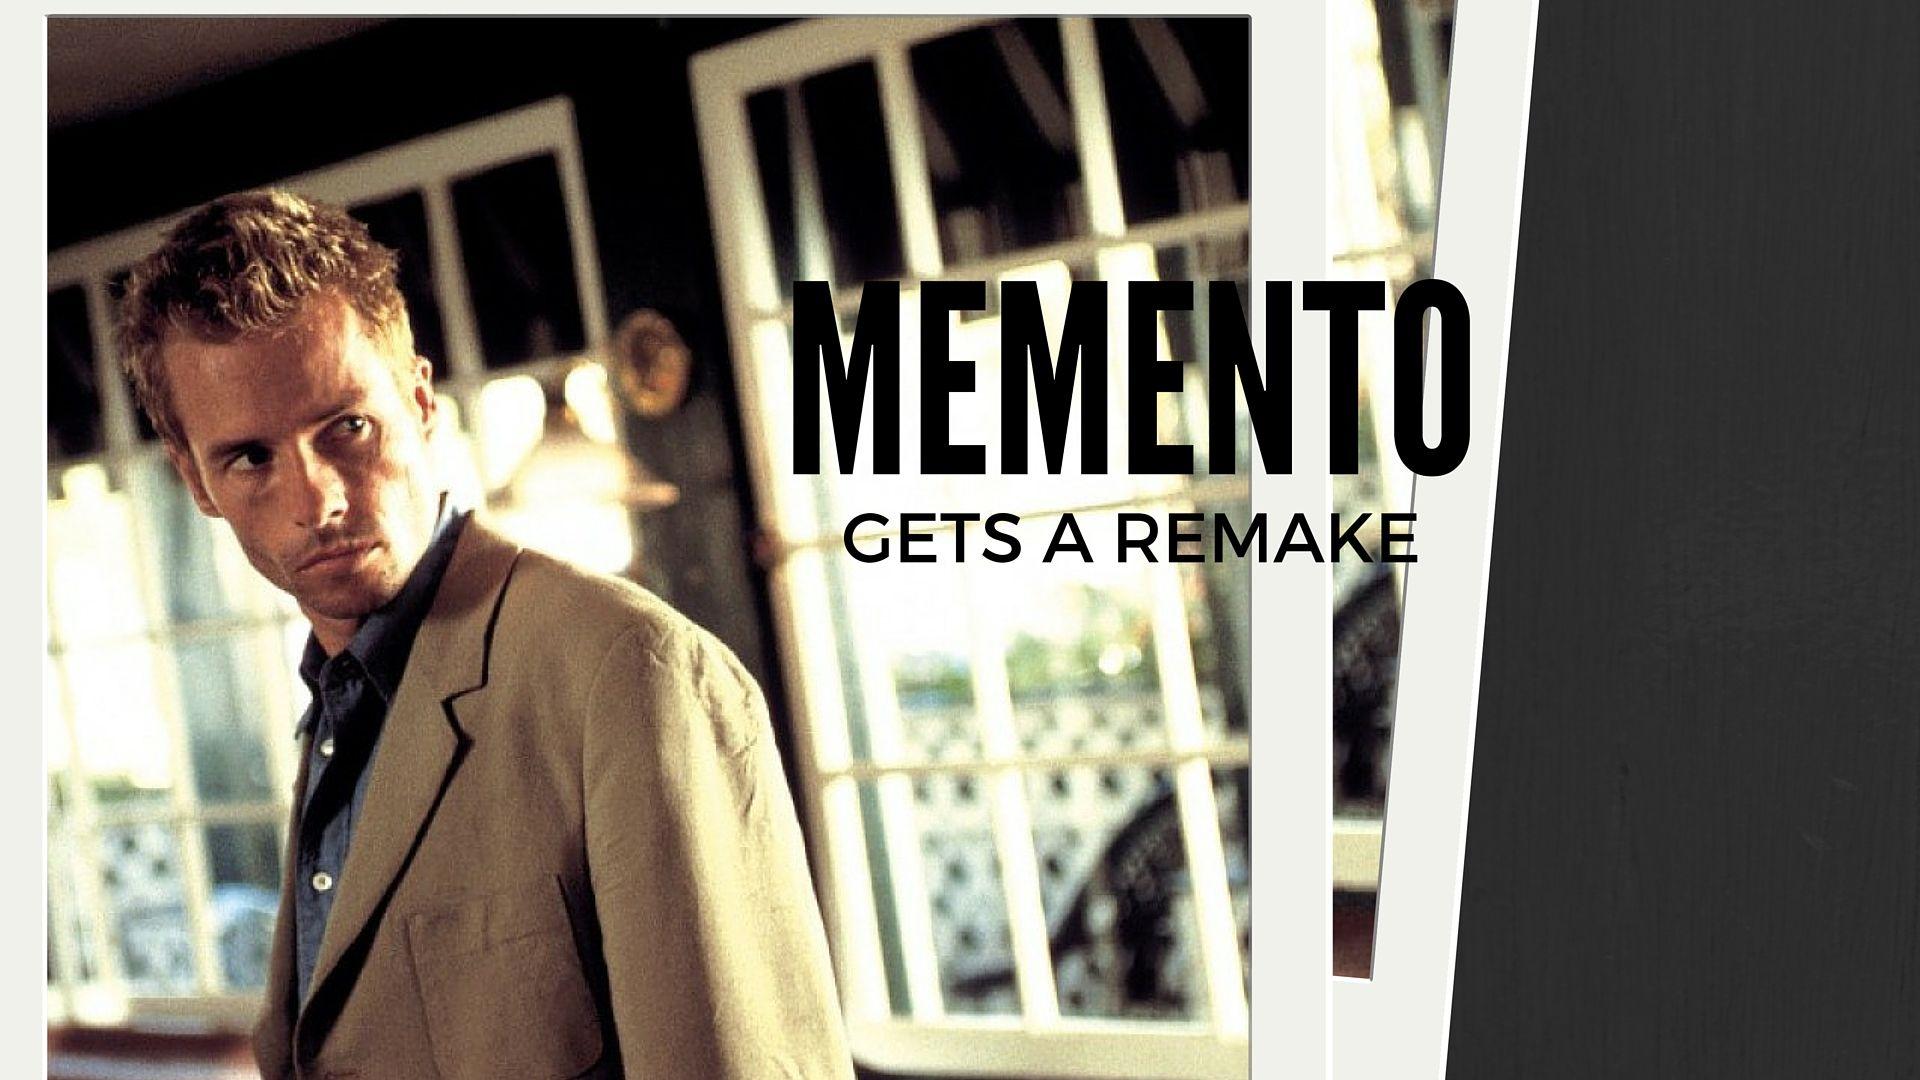 Memento (To Receive A Remake), Movies, TV Shows